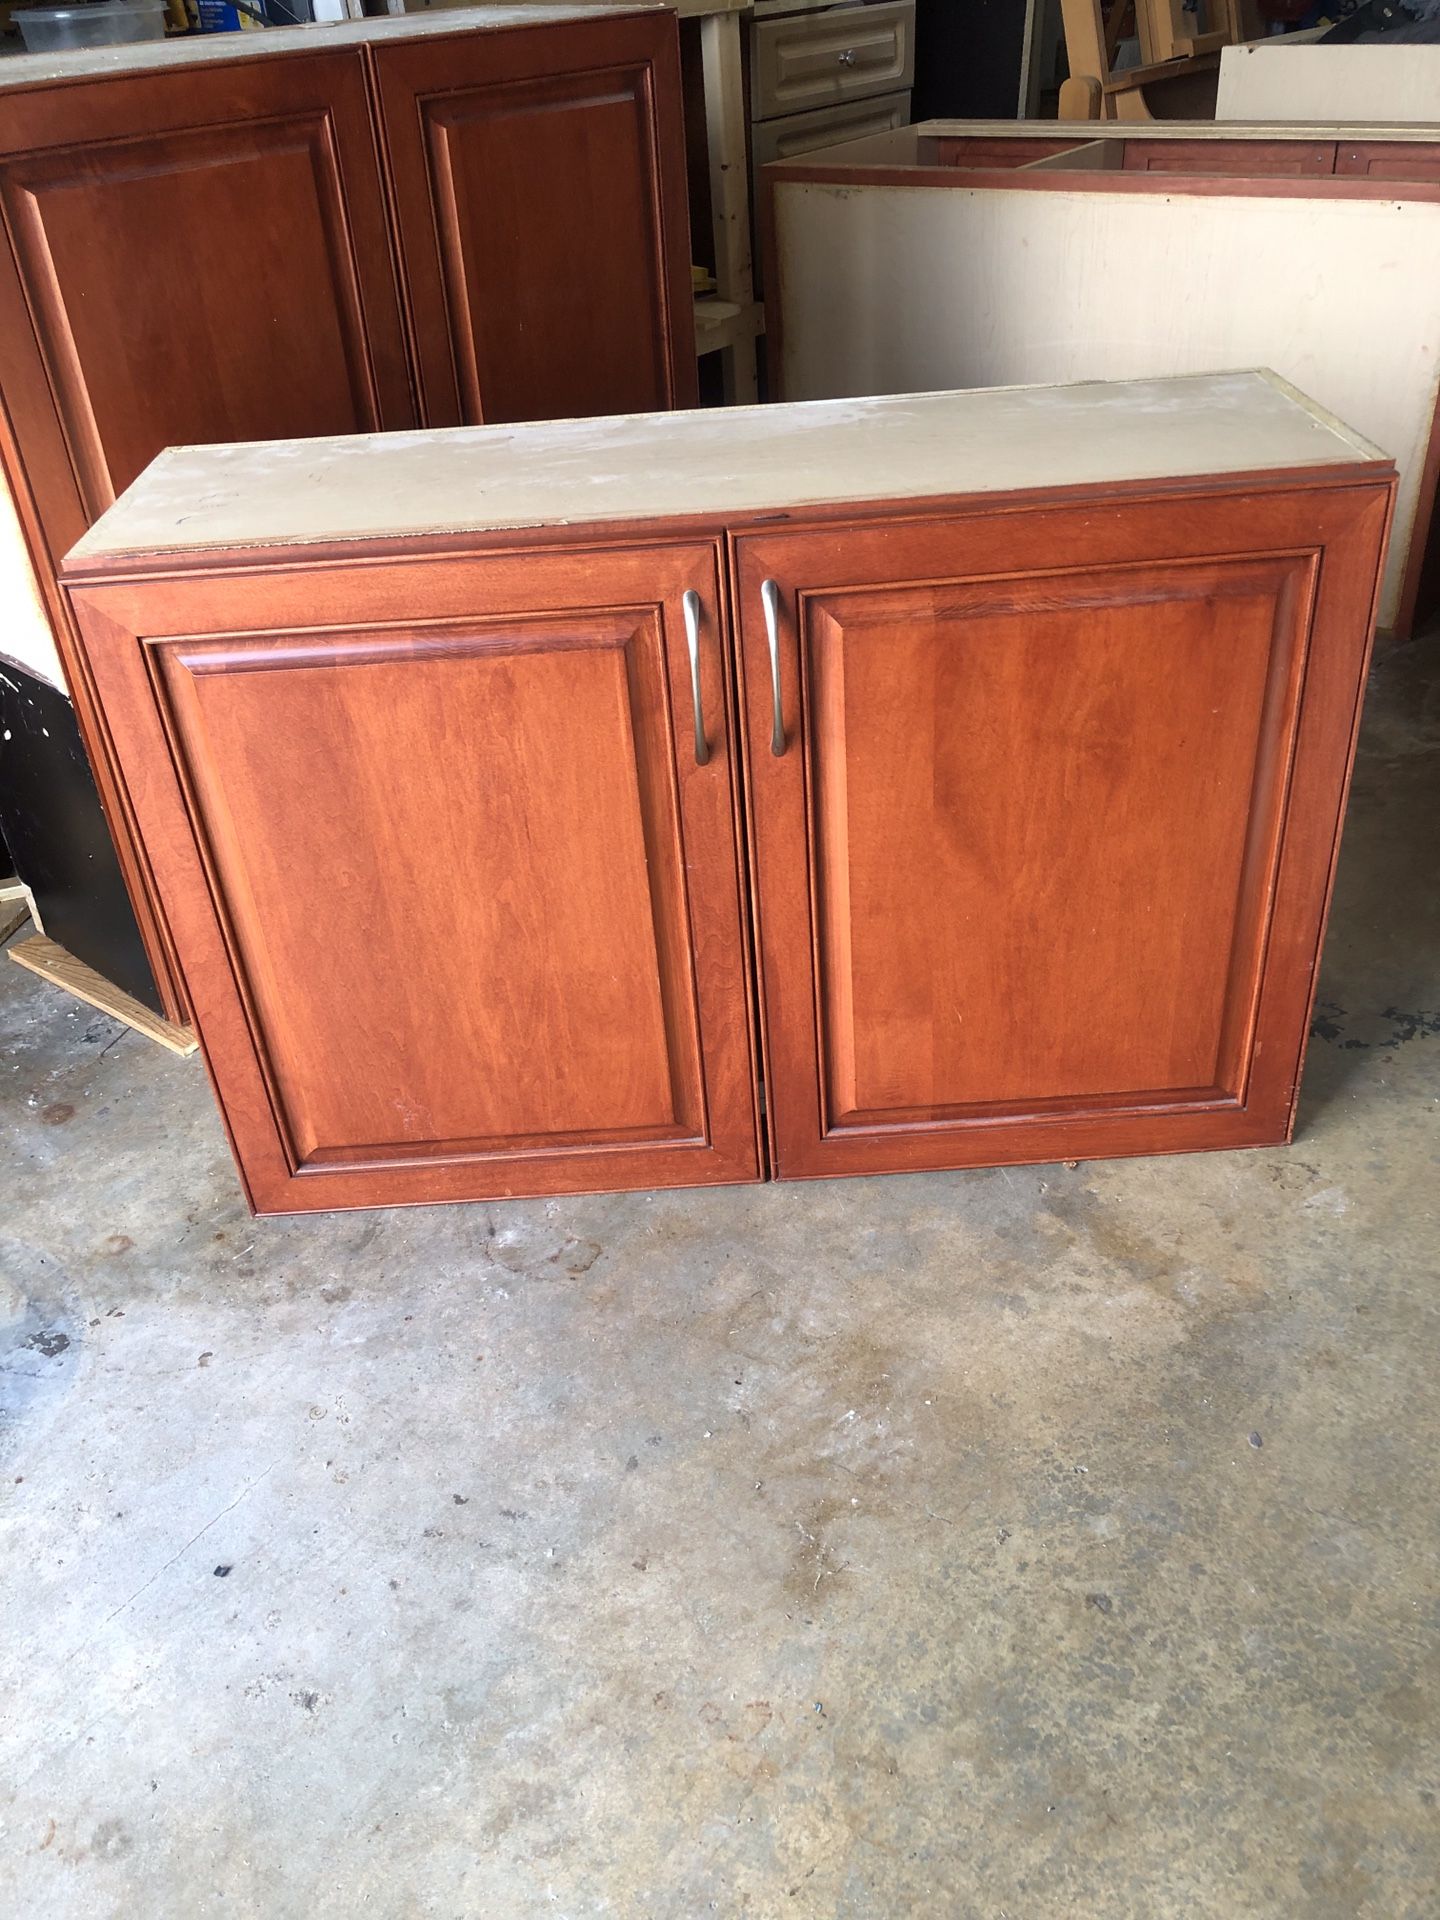 Used kitchen cabinets